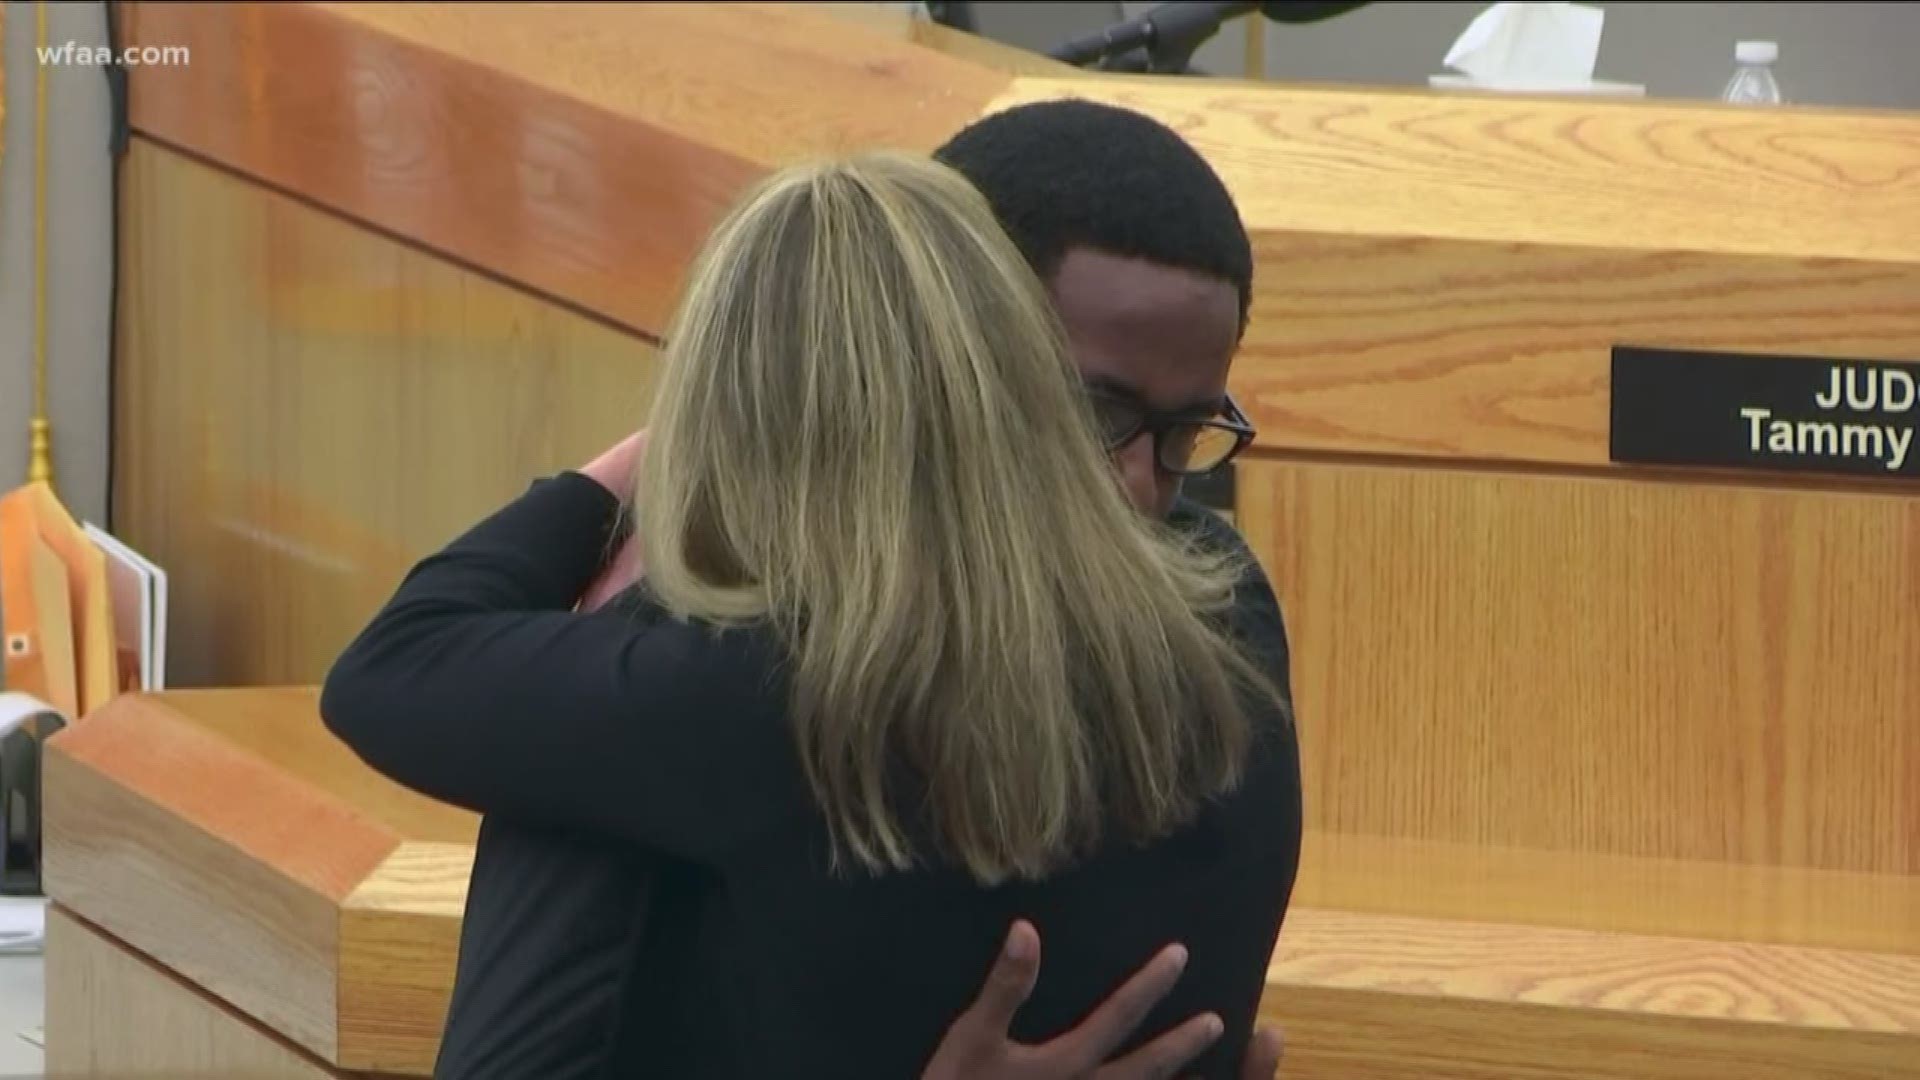 The 18-year-old brother of Botham Jean received the award from the Institute of Law Enforcement Administration in Plano.